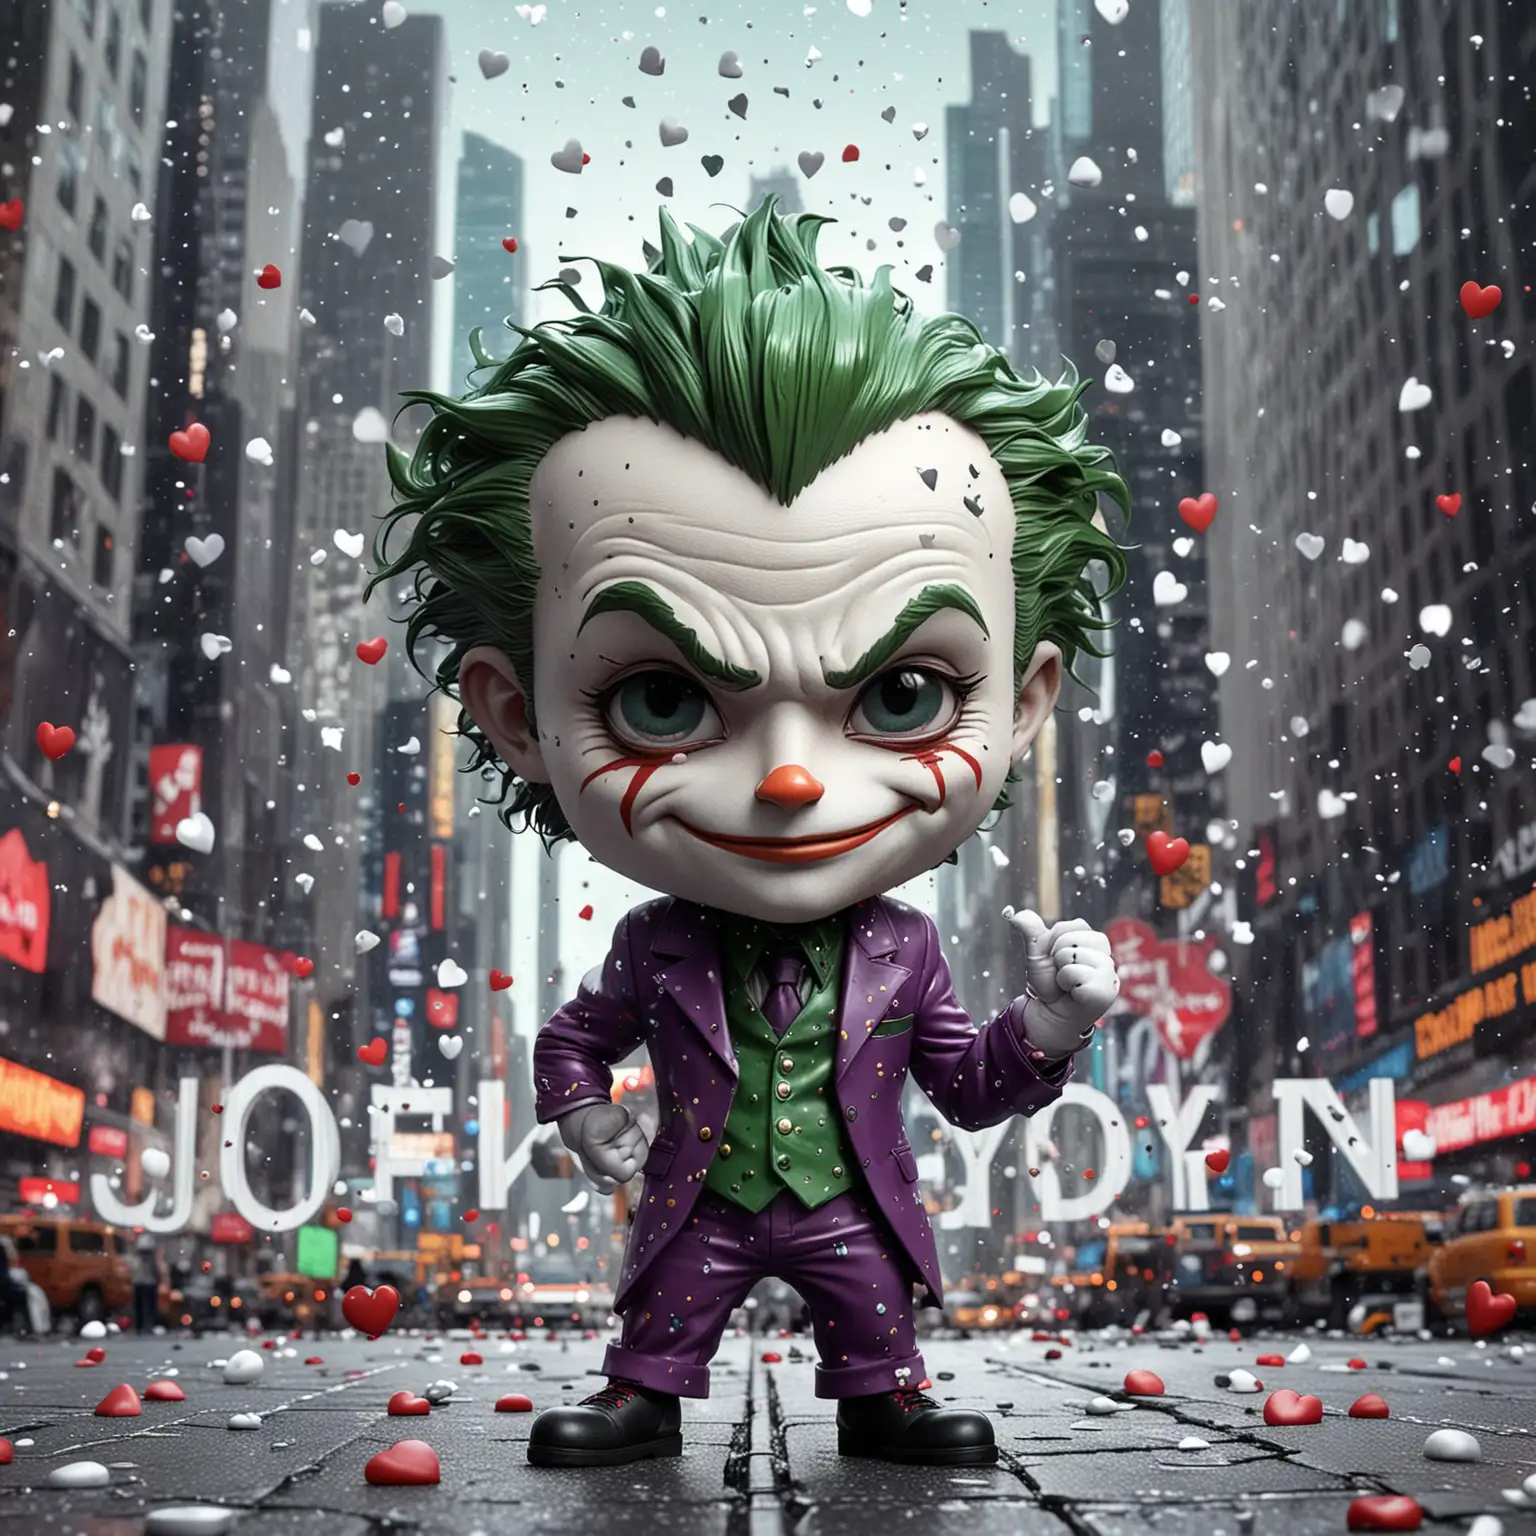 A ‏ charming and playful 3D rendering of the  joker as a chibi character. He is dressed in his signature style.written in comical, metallic white text, surrounded by stars and hearts. The background is a times squre new York . The overall feeling of the image is lively, fun, and full of energy., typography, poster, cinematic, fashion, anime